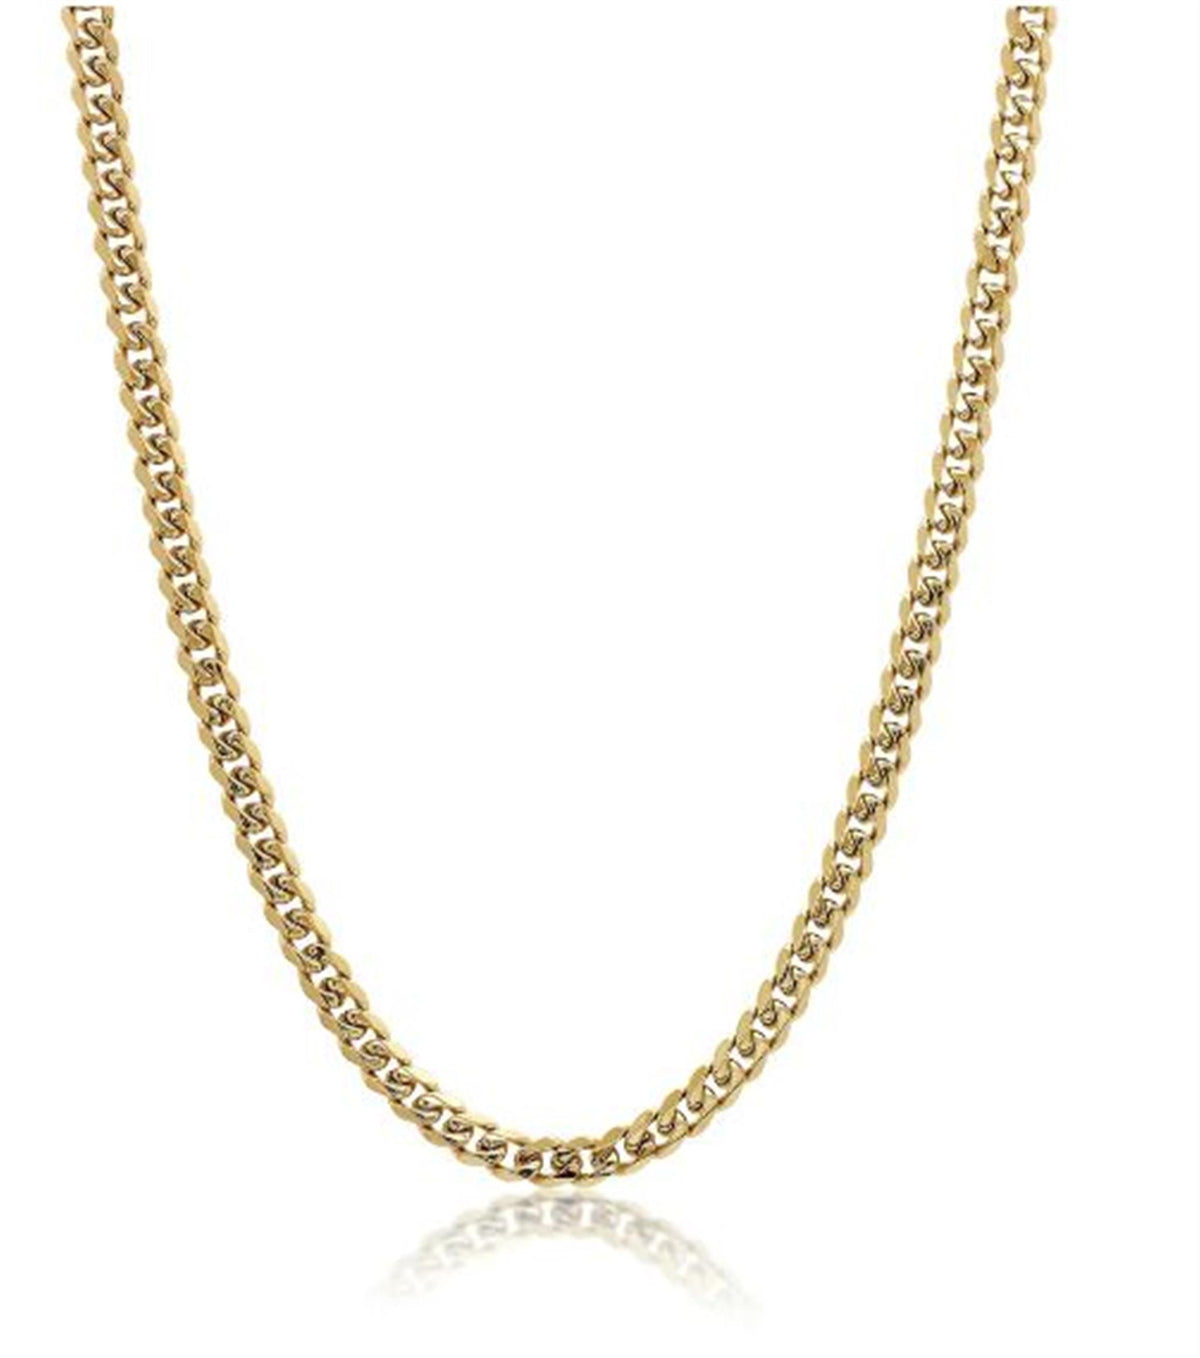 Italgem Stainless Steel and Gold Overlay Chain